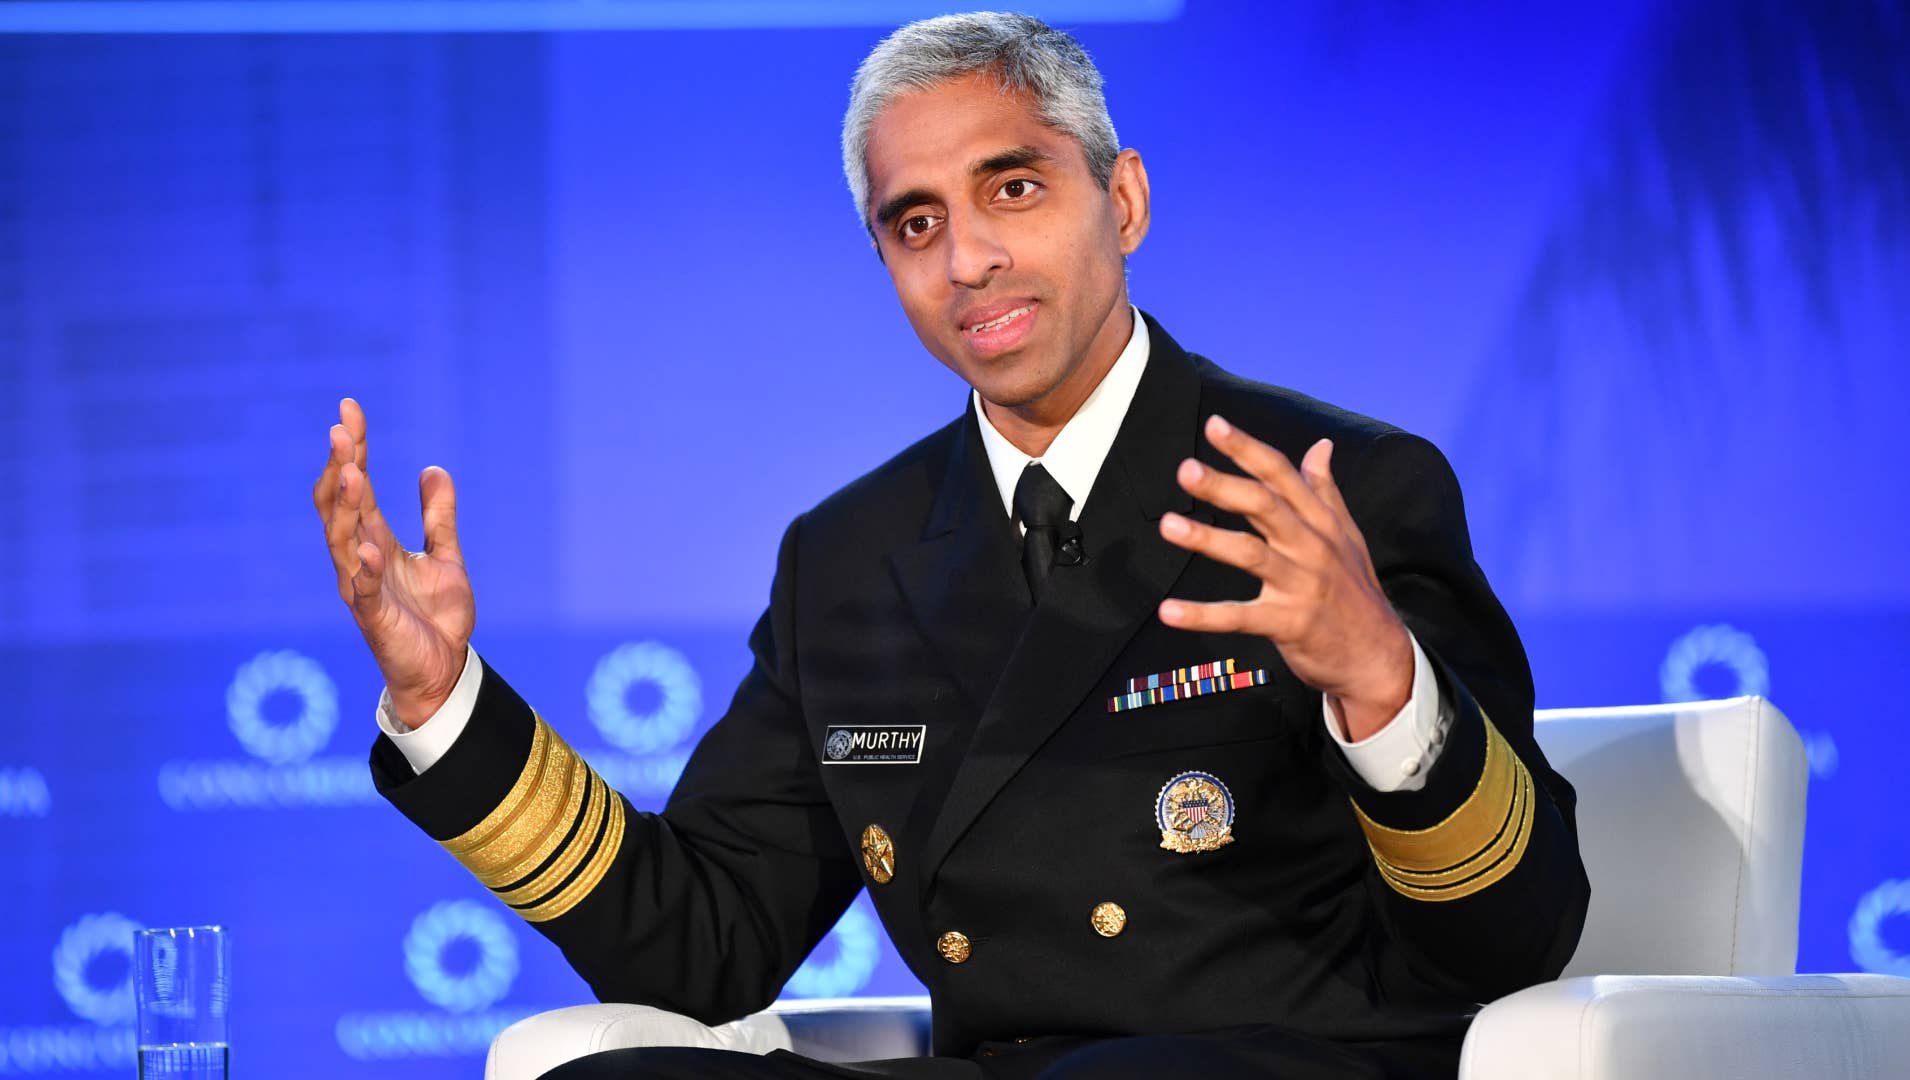 Surgeon General of United States is pictured